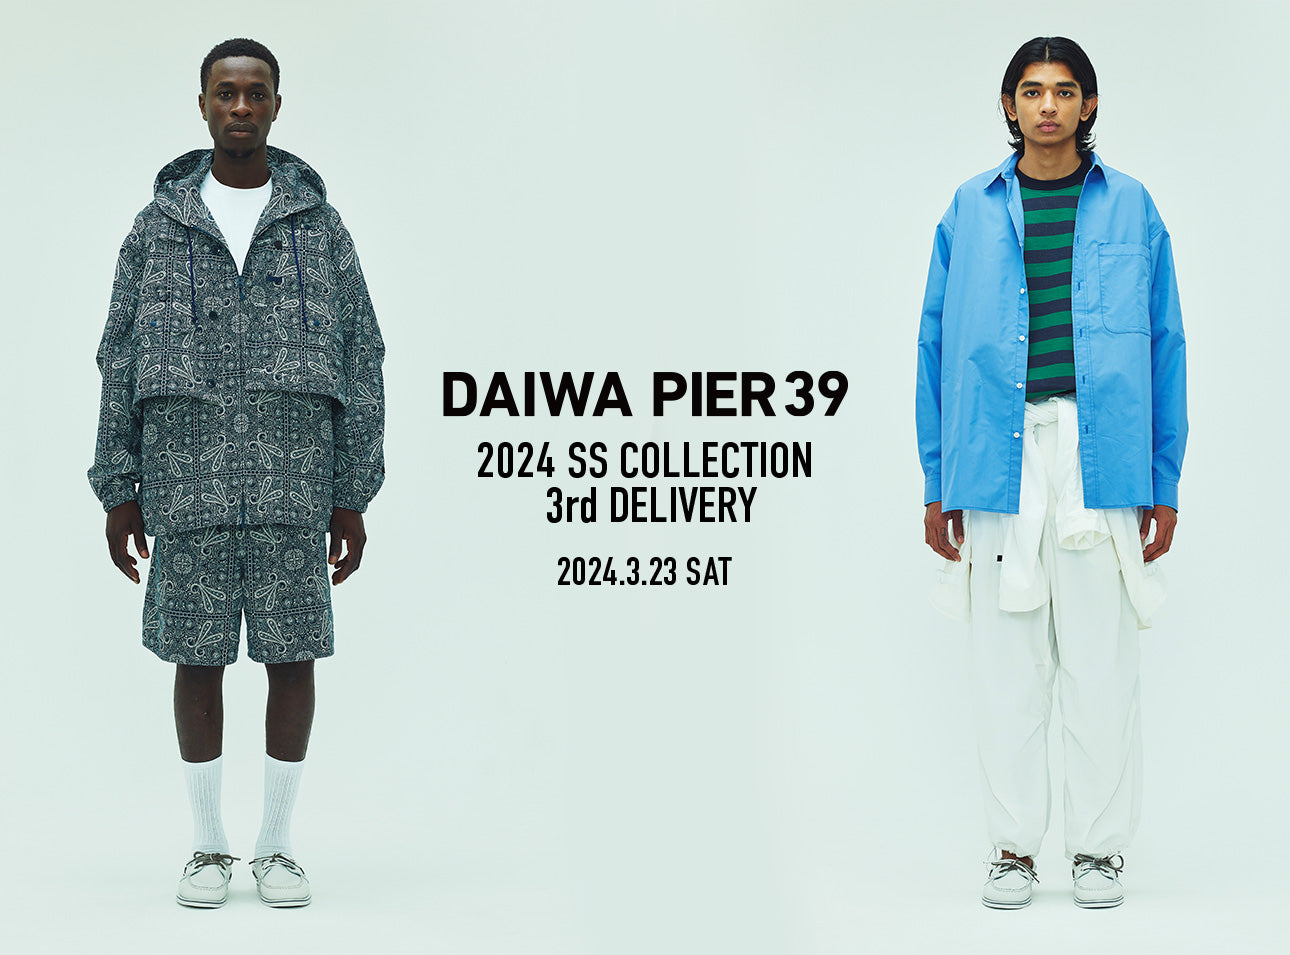 DAIWA PIER39 2024 SS COLLECTION 3rd DELIVERY